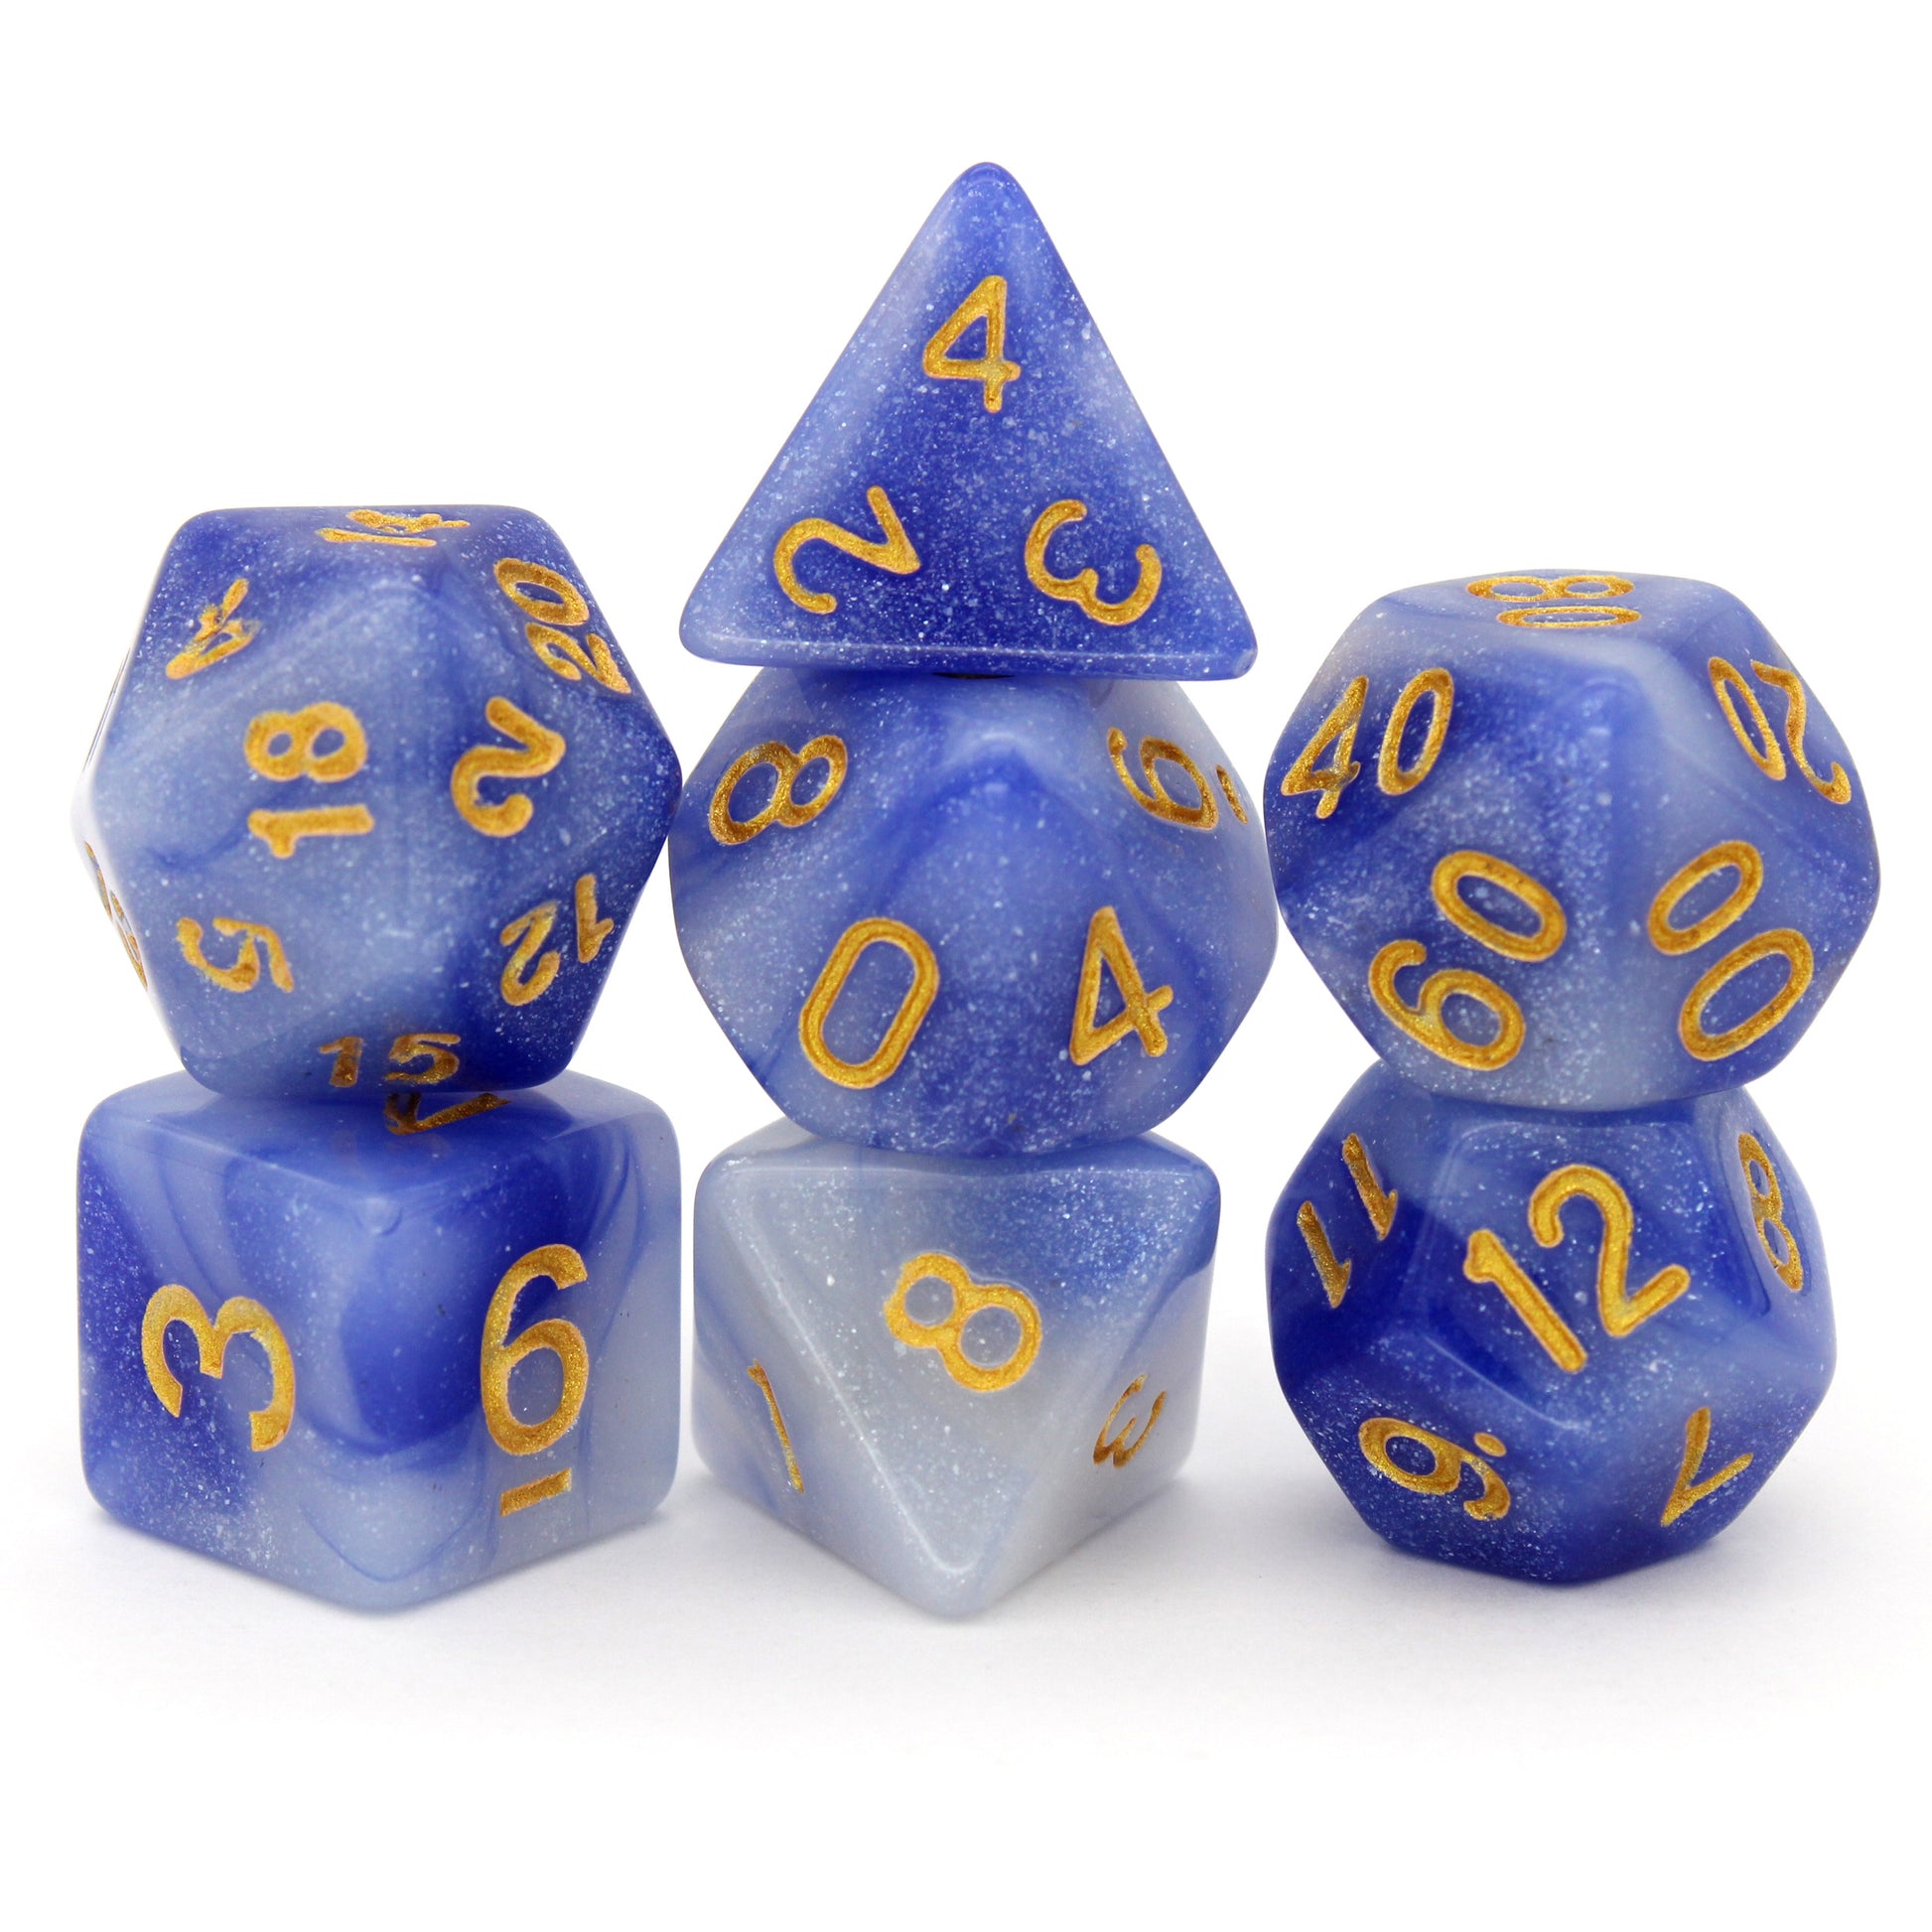 Blue Crystal is a 7-piece blue and white opaque set with pearlescent glitter and gold numbers.